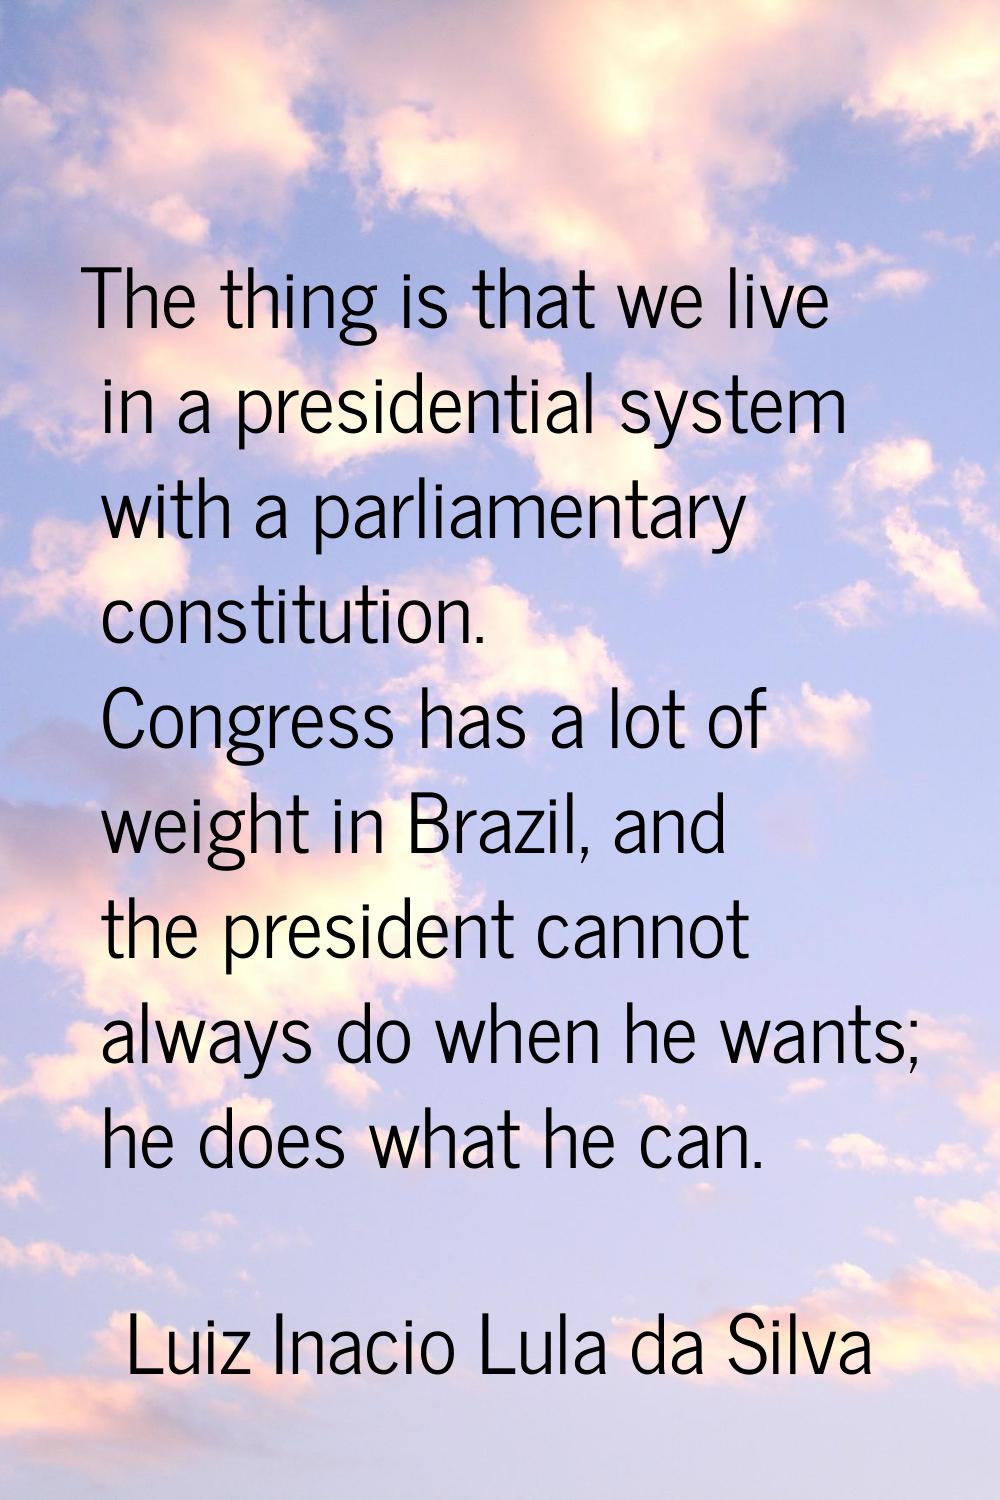 The thing is that we live in a presidential system with a parliamentary constitution. Congress has 